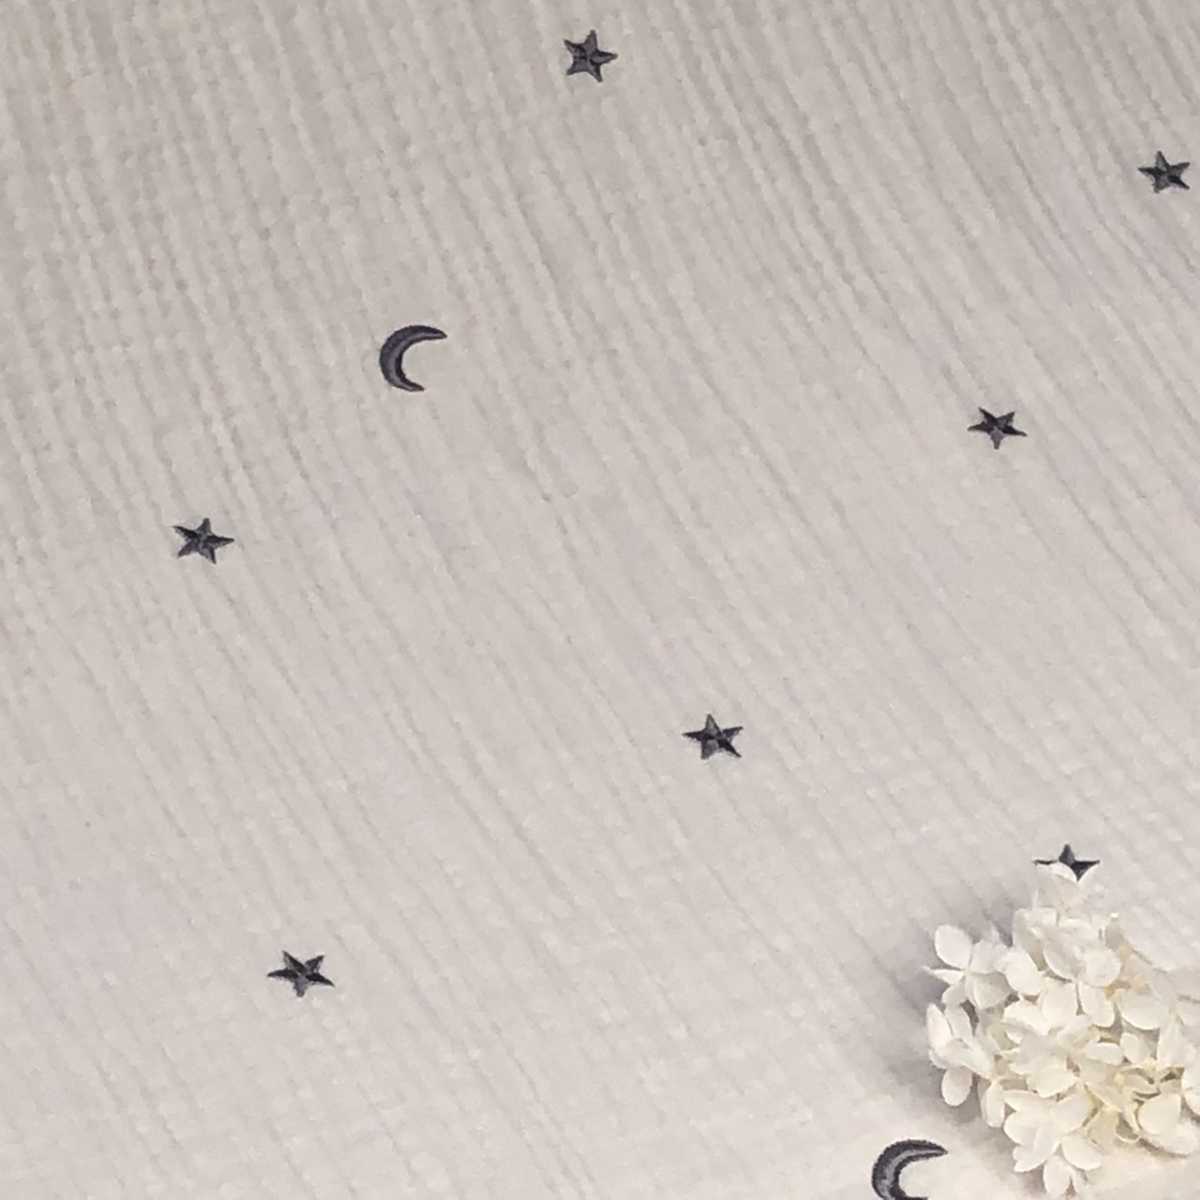  new goods star . month blue gray embroidery 6 -ply gauze packet blanket Korea Eve ru70×90cm